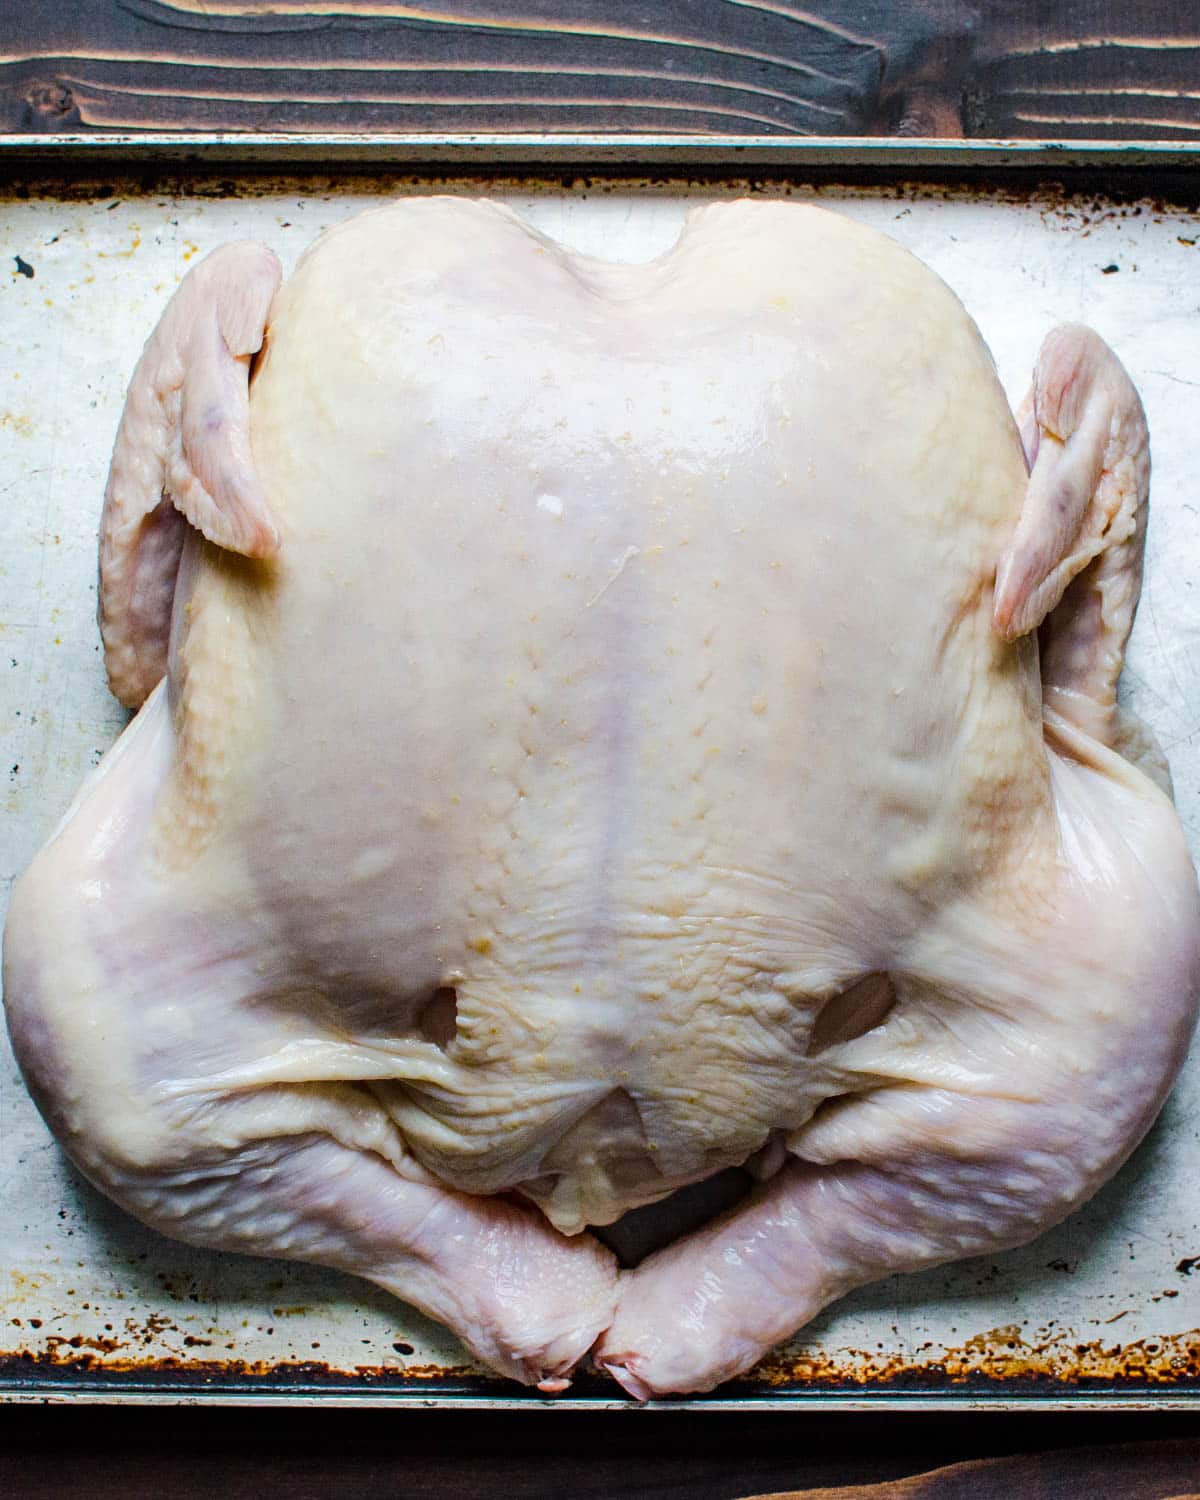 a whole chicken on a baking sheet.